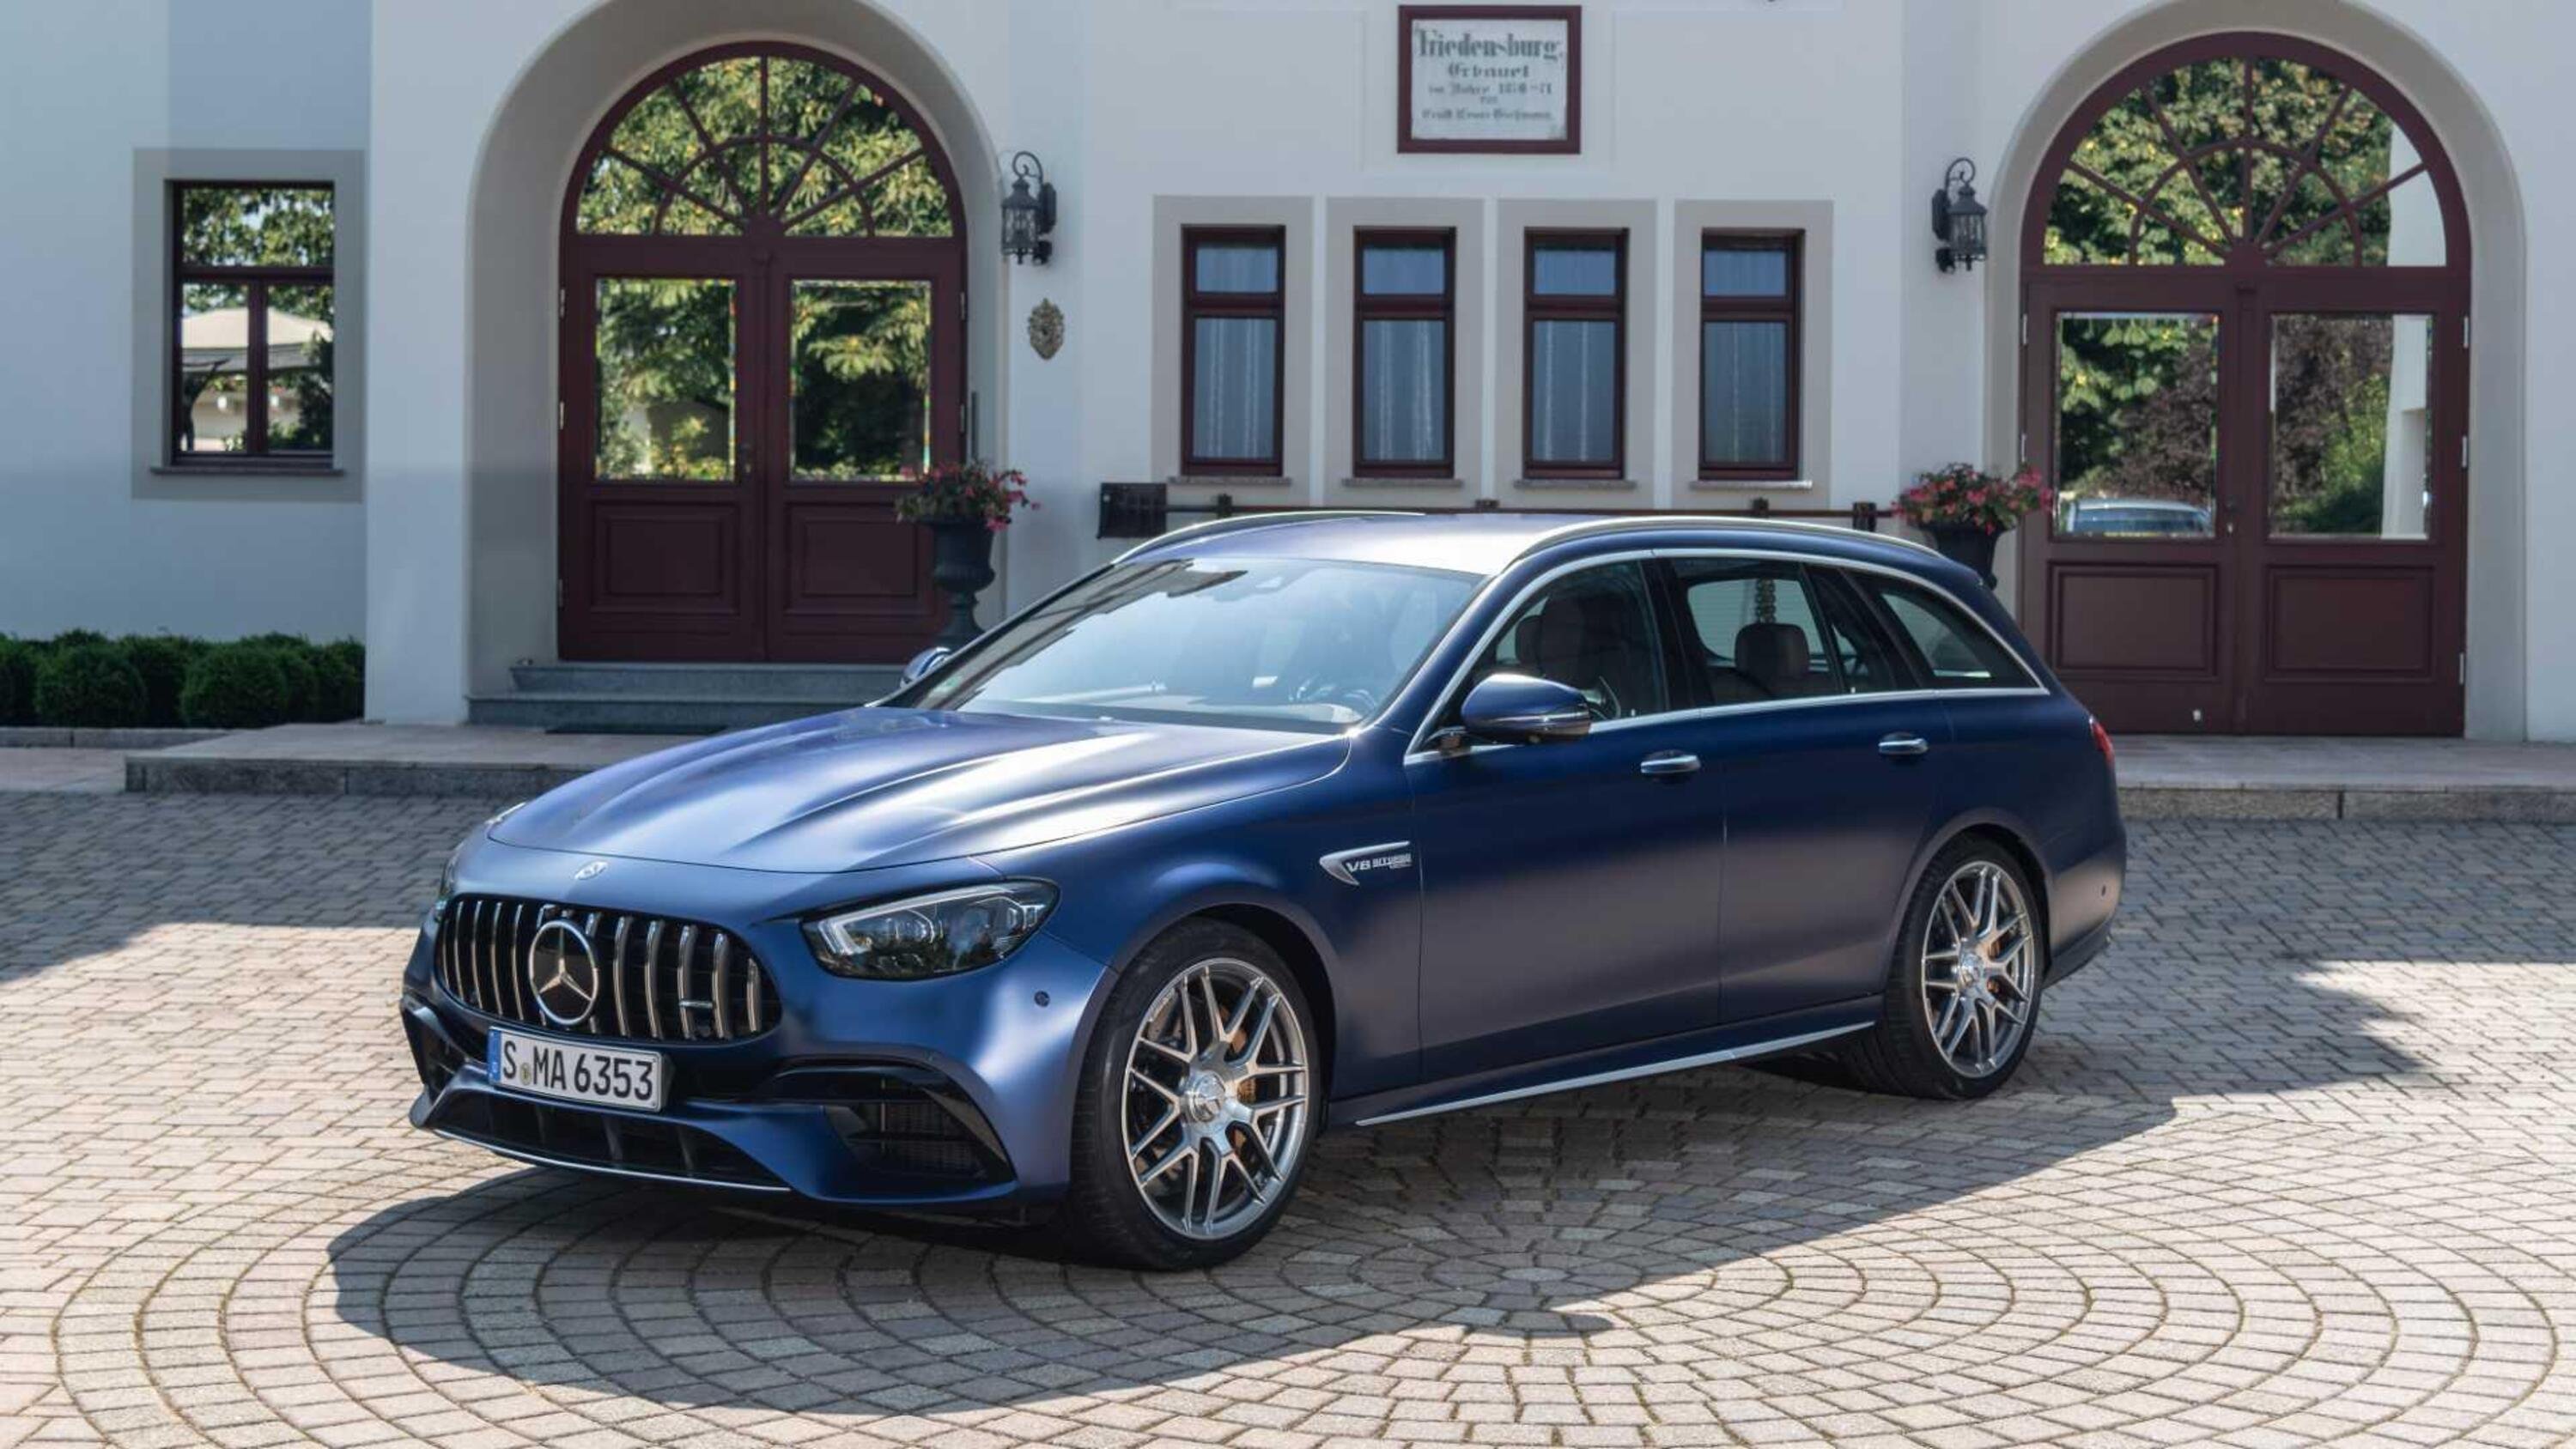 Mercedes-Benz Classe E Station Wagon 63 S 4Matic+ AMG my 20